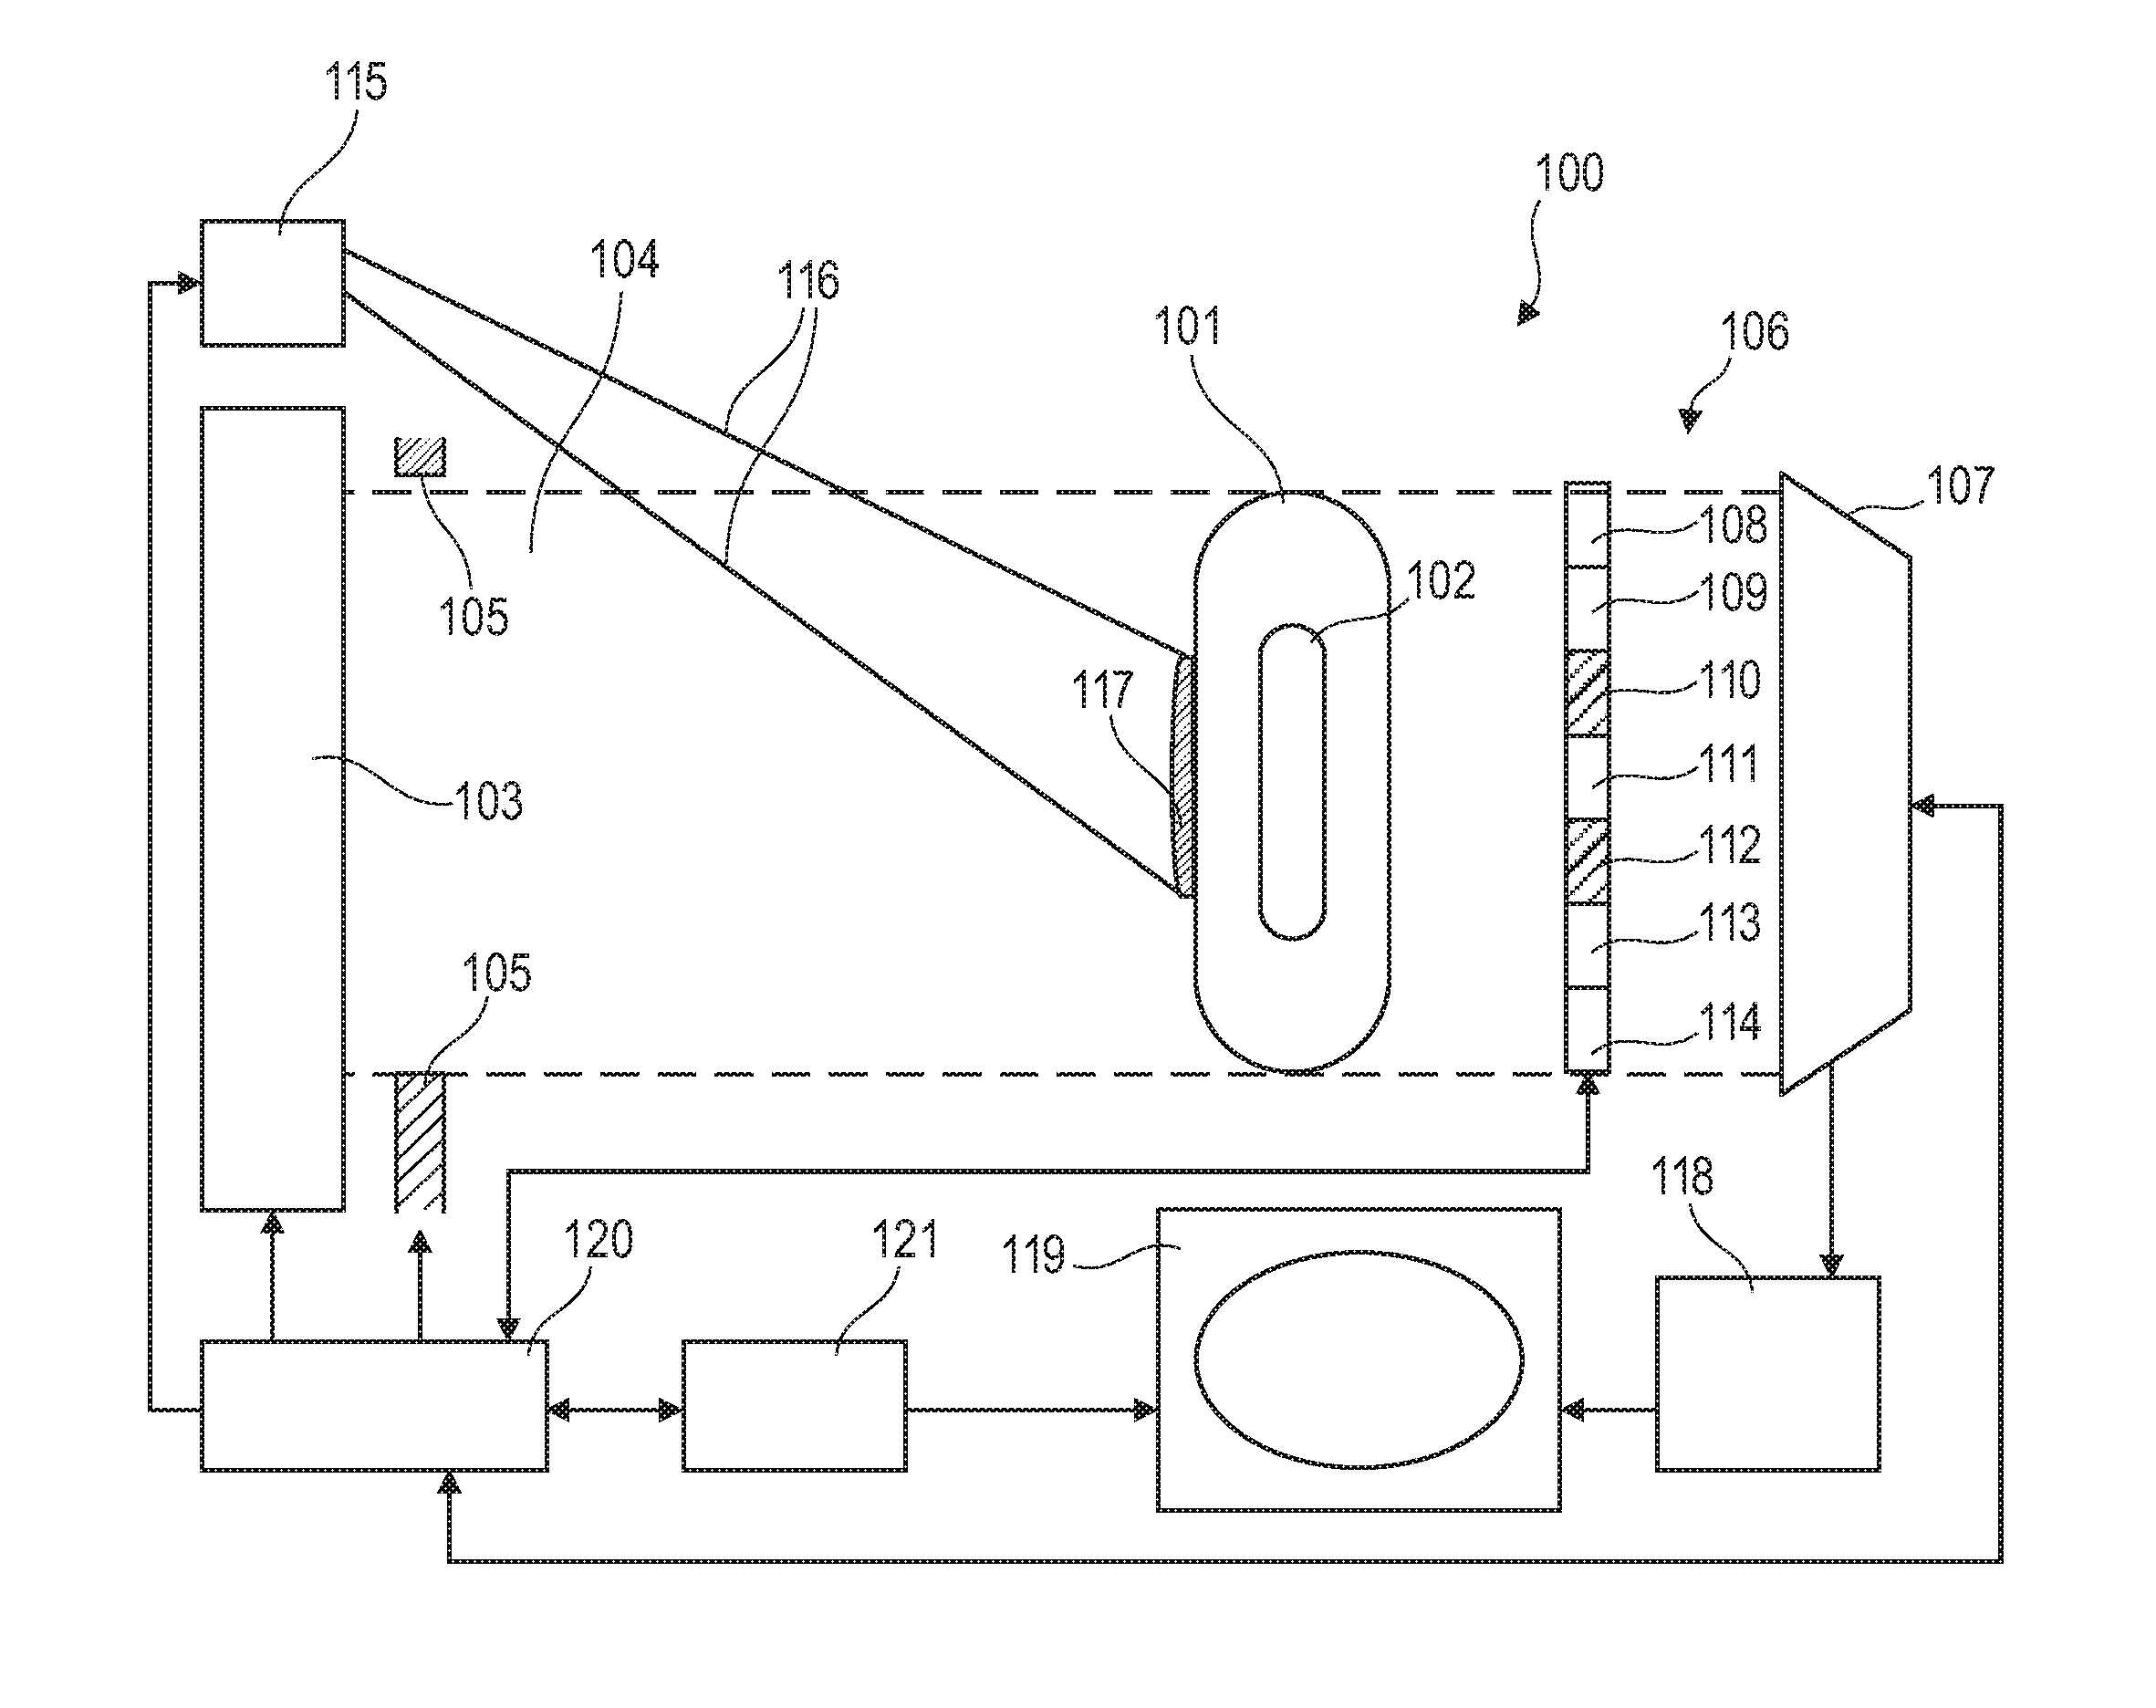 X-ray image apparatus and method of imaging an object under examination